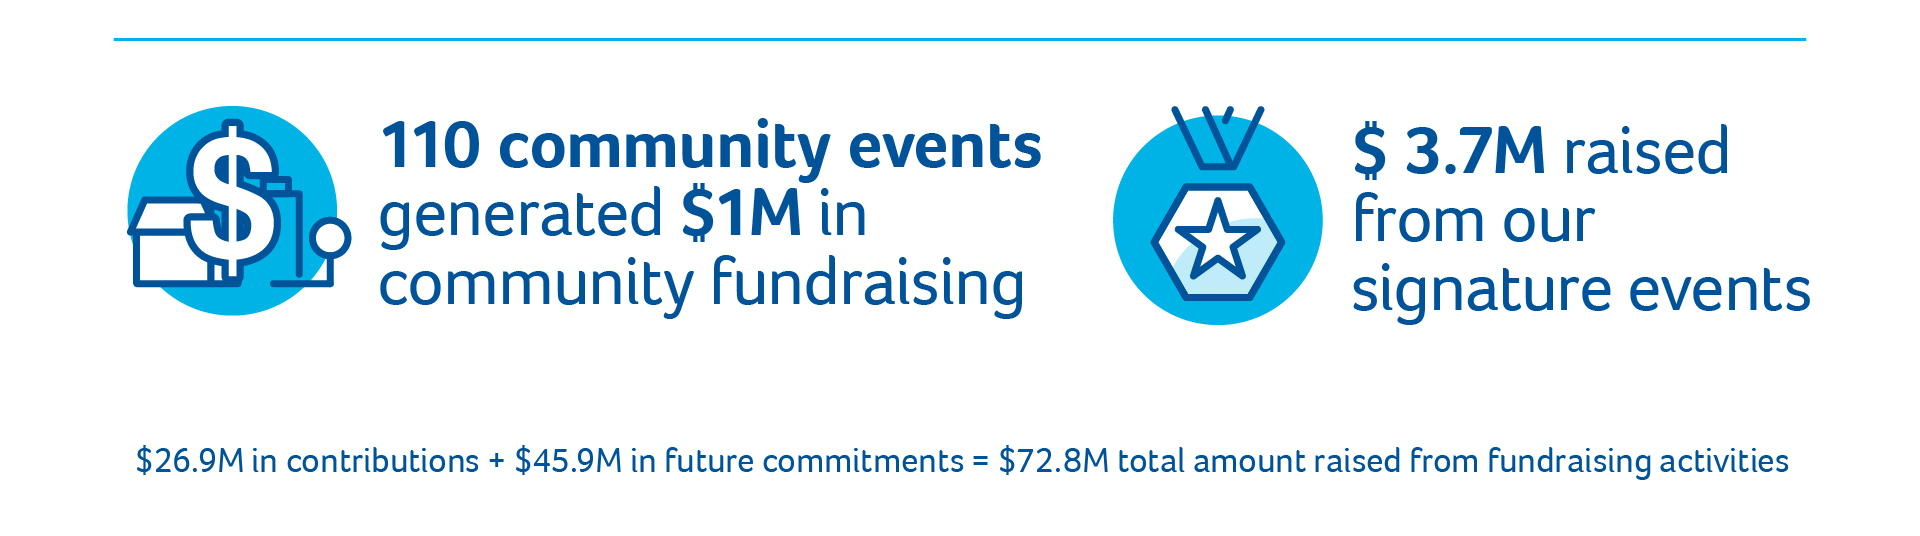 110 community events generated $1M community fundraising. $3.7M raised from our signature events.